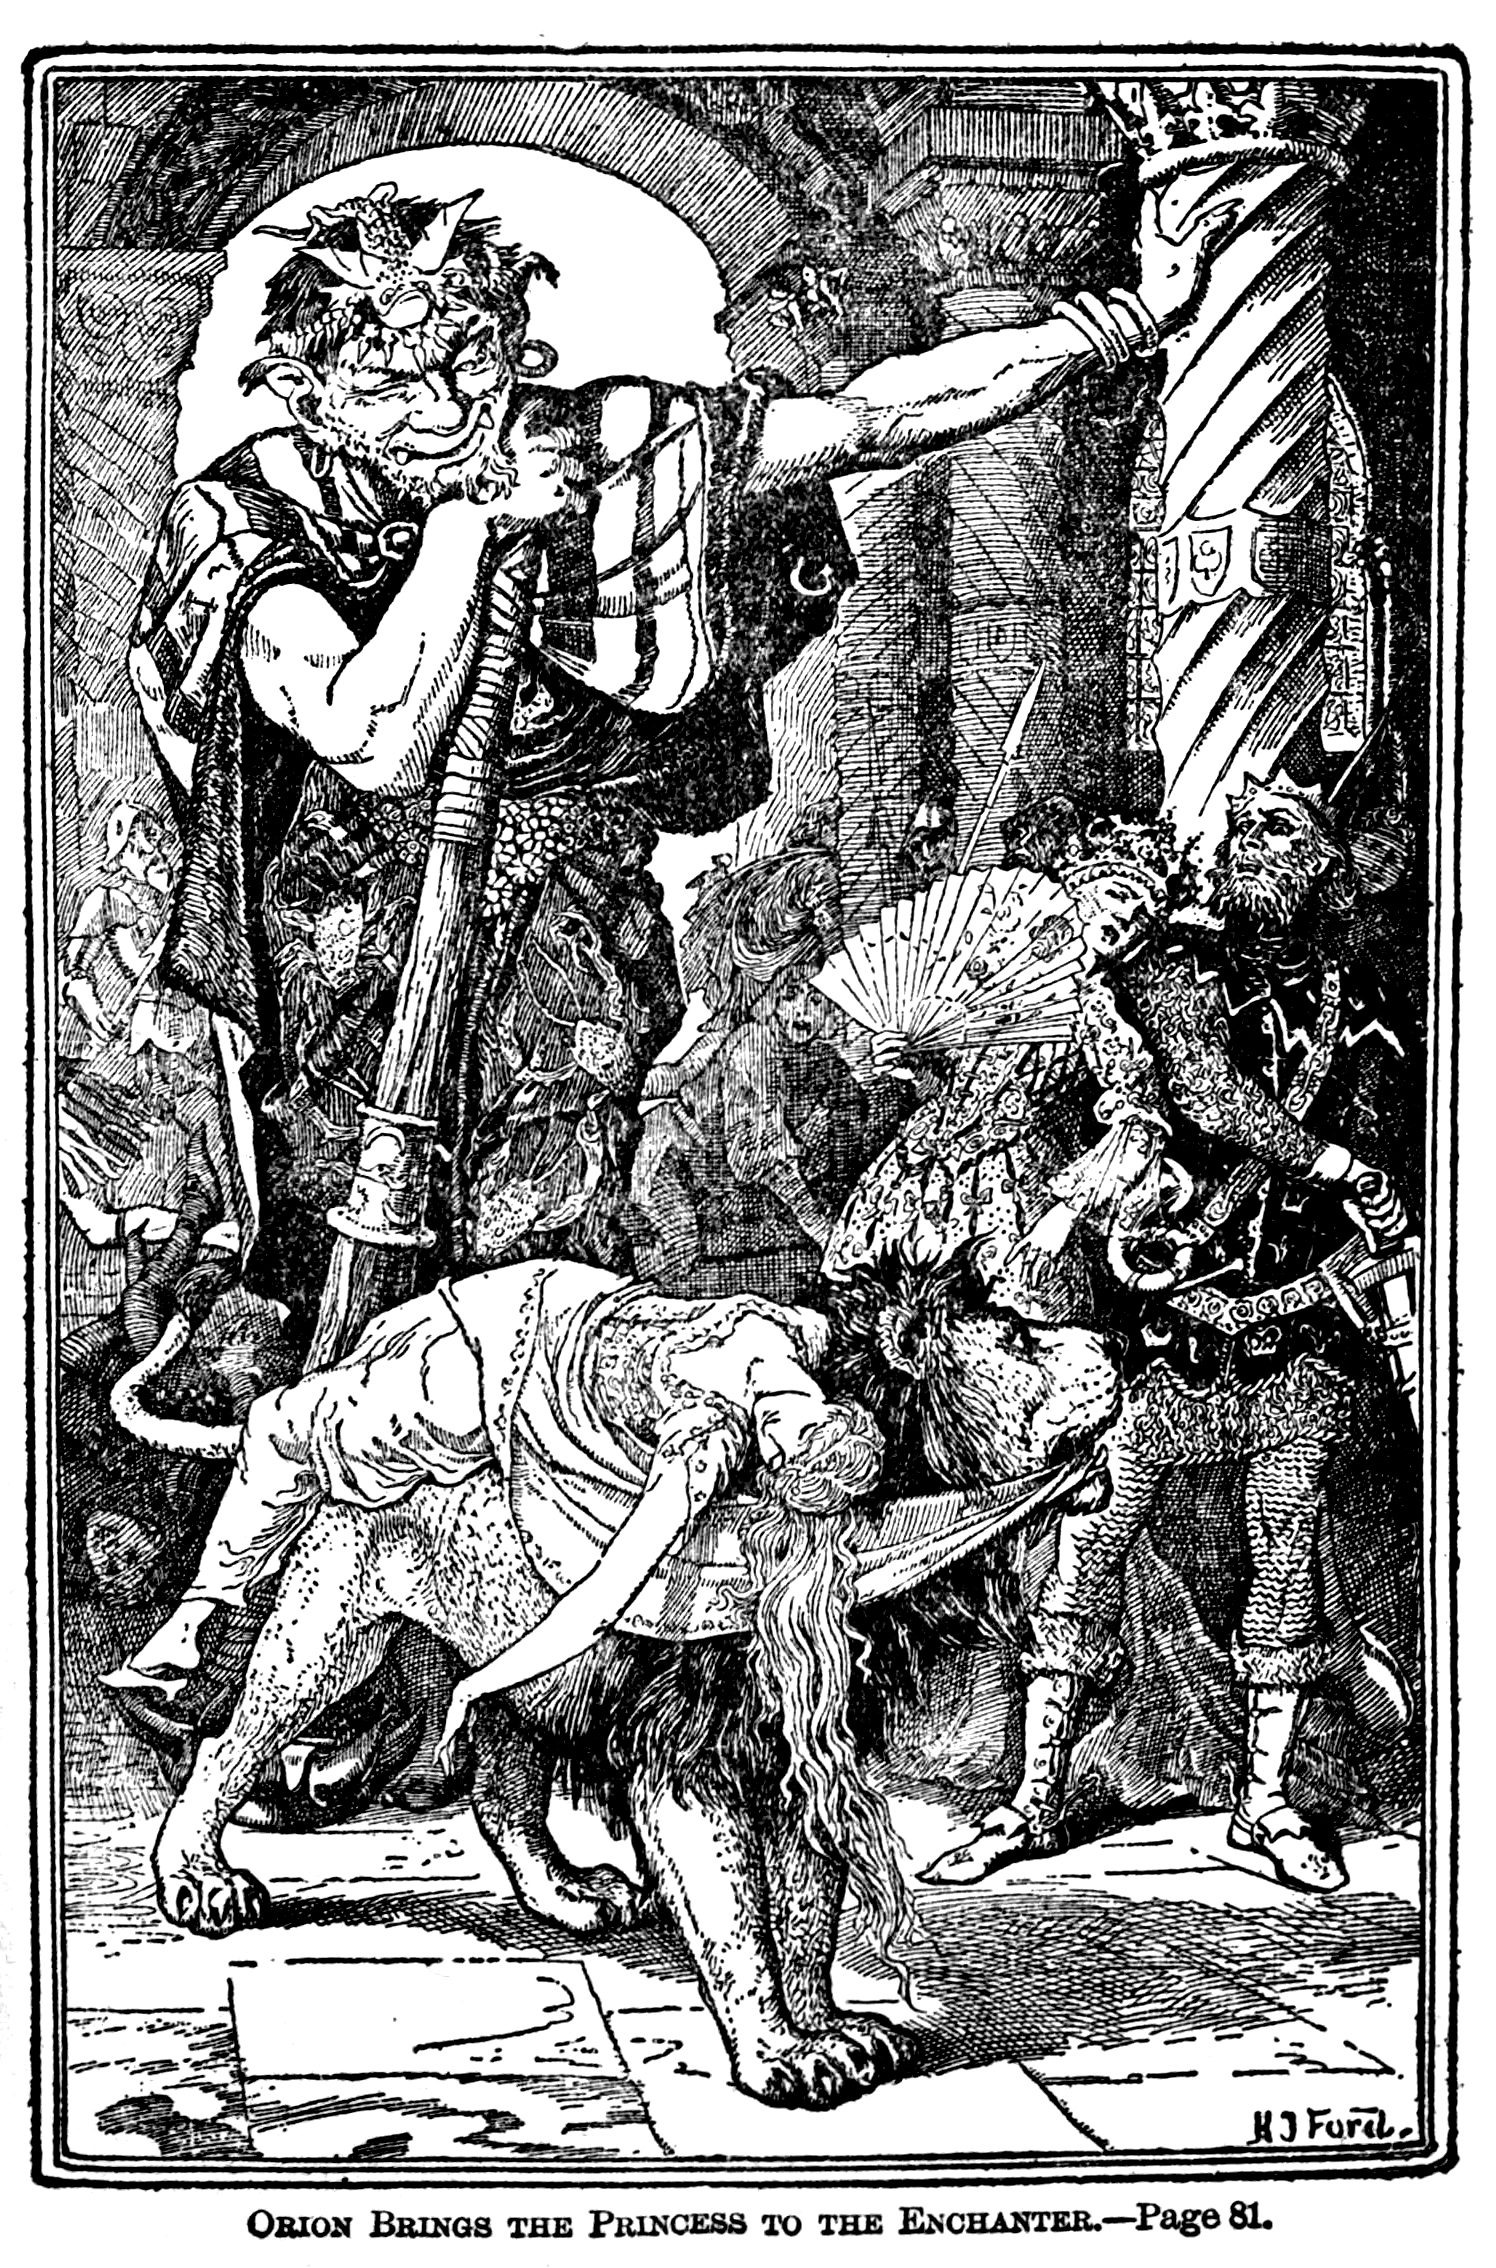 Henry Justice Ford - The green fairy book, edited by Andrew Lang, 1900 (illustration 2)